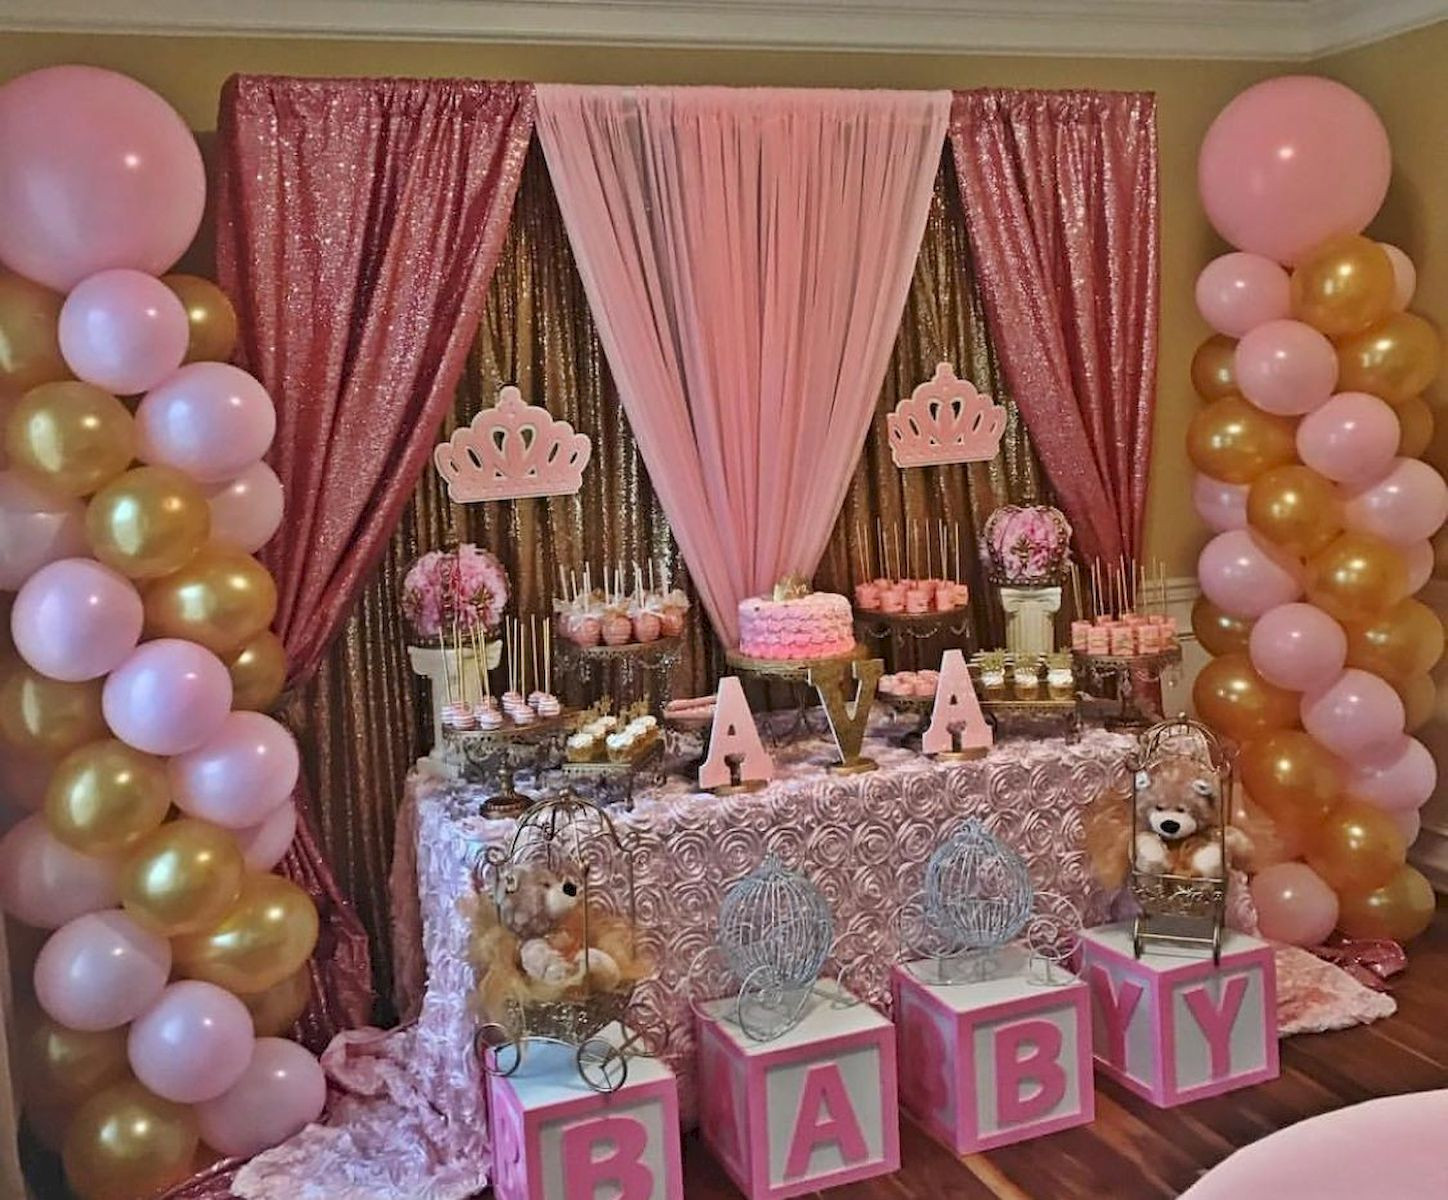 Baby Shower Decor Ideas For Girls
 50 Cute Baby Shower Themes And Decorating Ideas For Girls